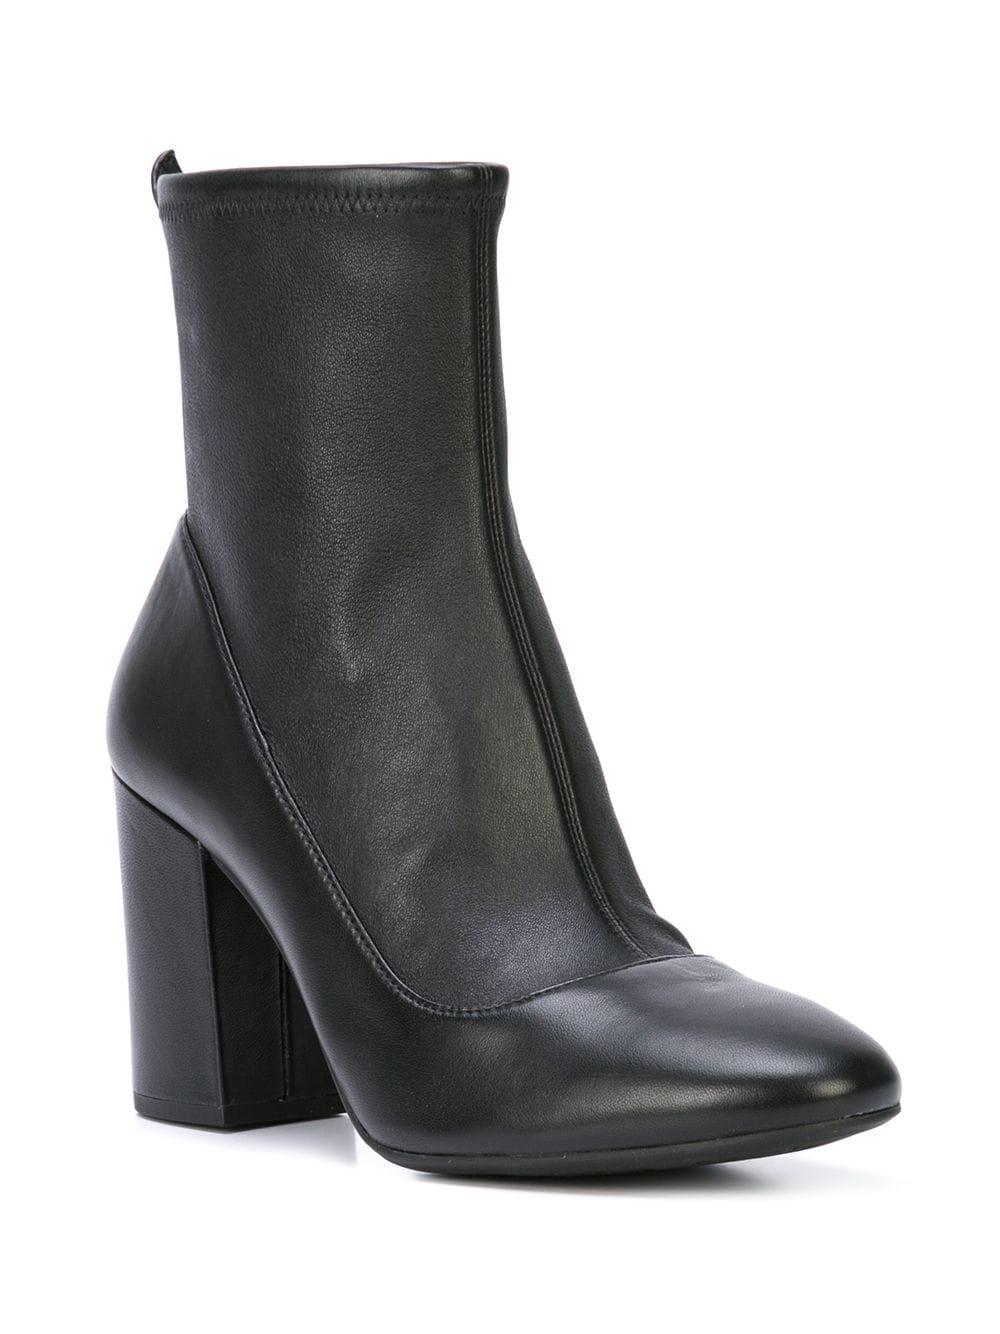 COACH Leather Giana Stretch Boots in Black | Lyst Canada